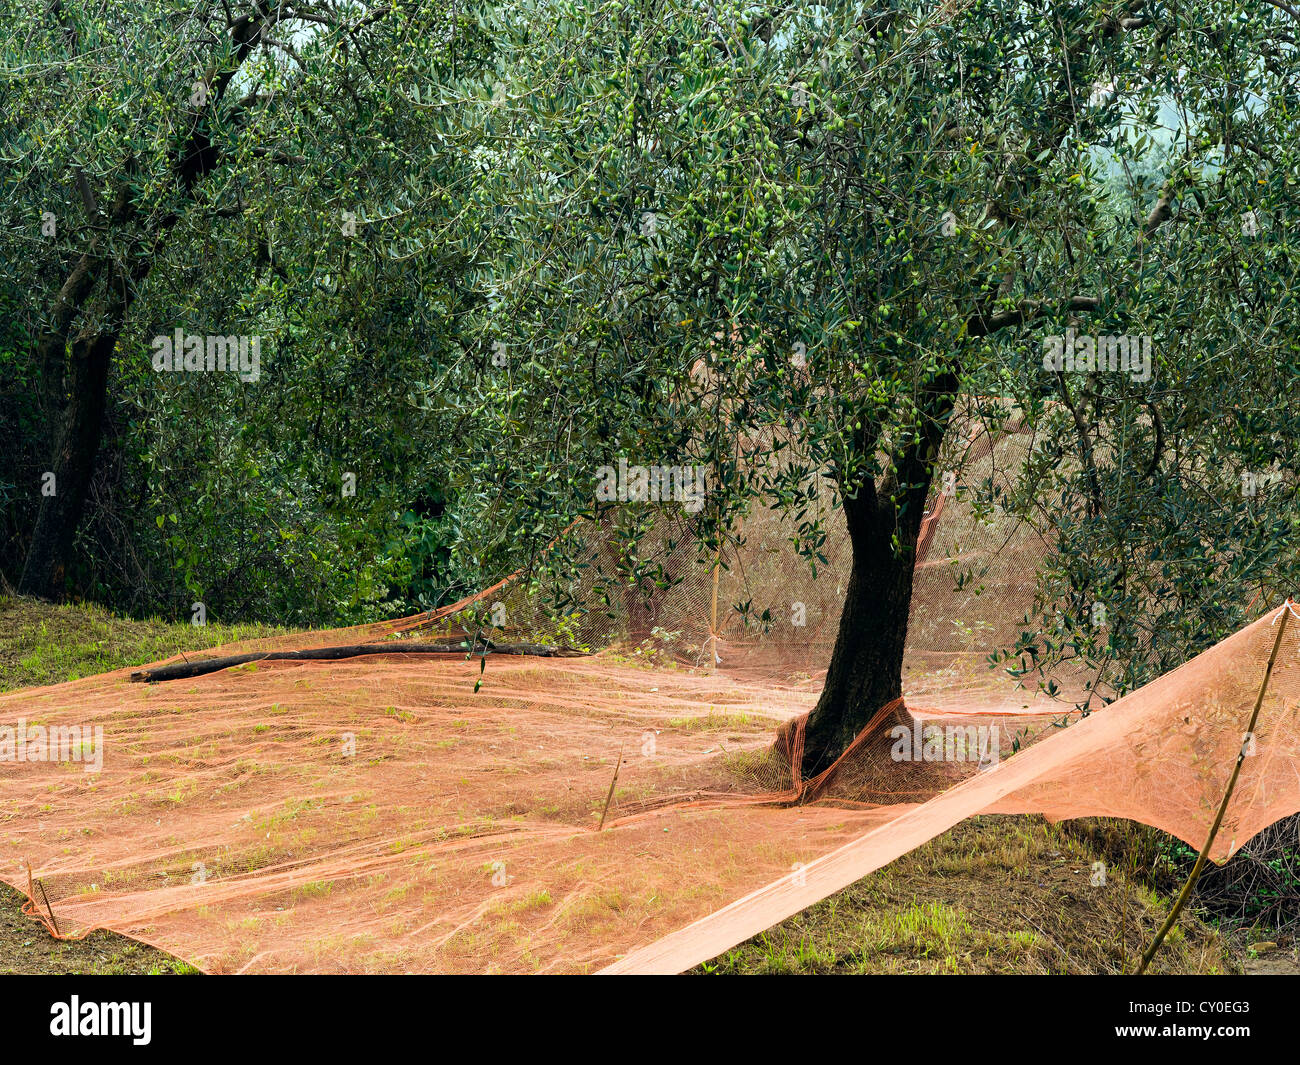 Preparing for the olive harvest - nets under trees, Italy Stock Photo